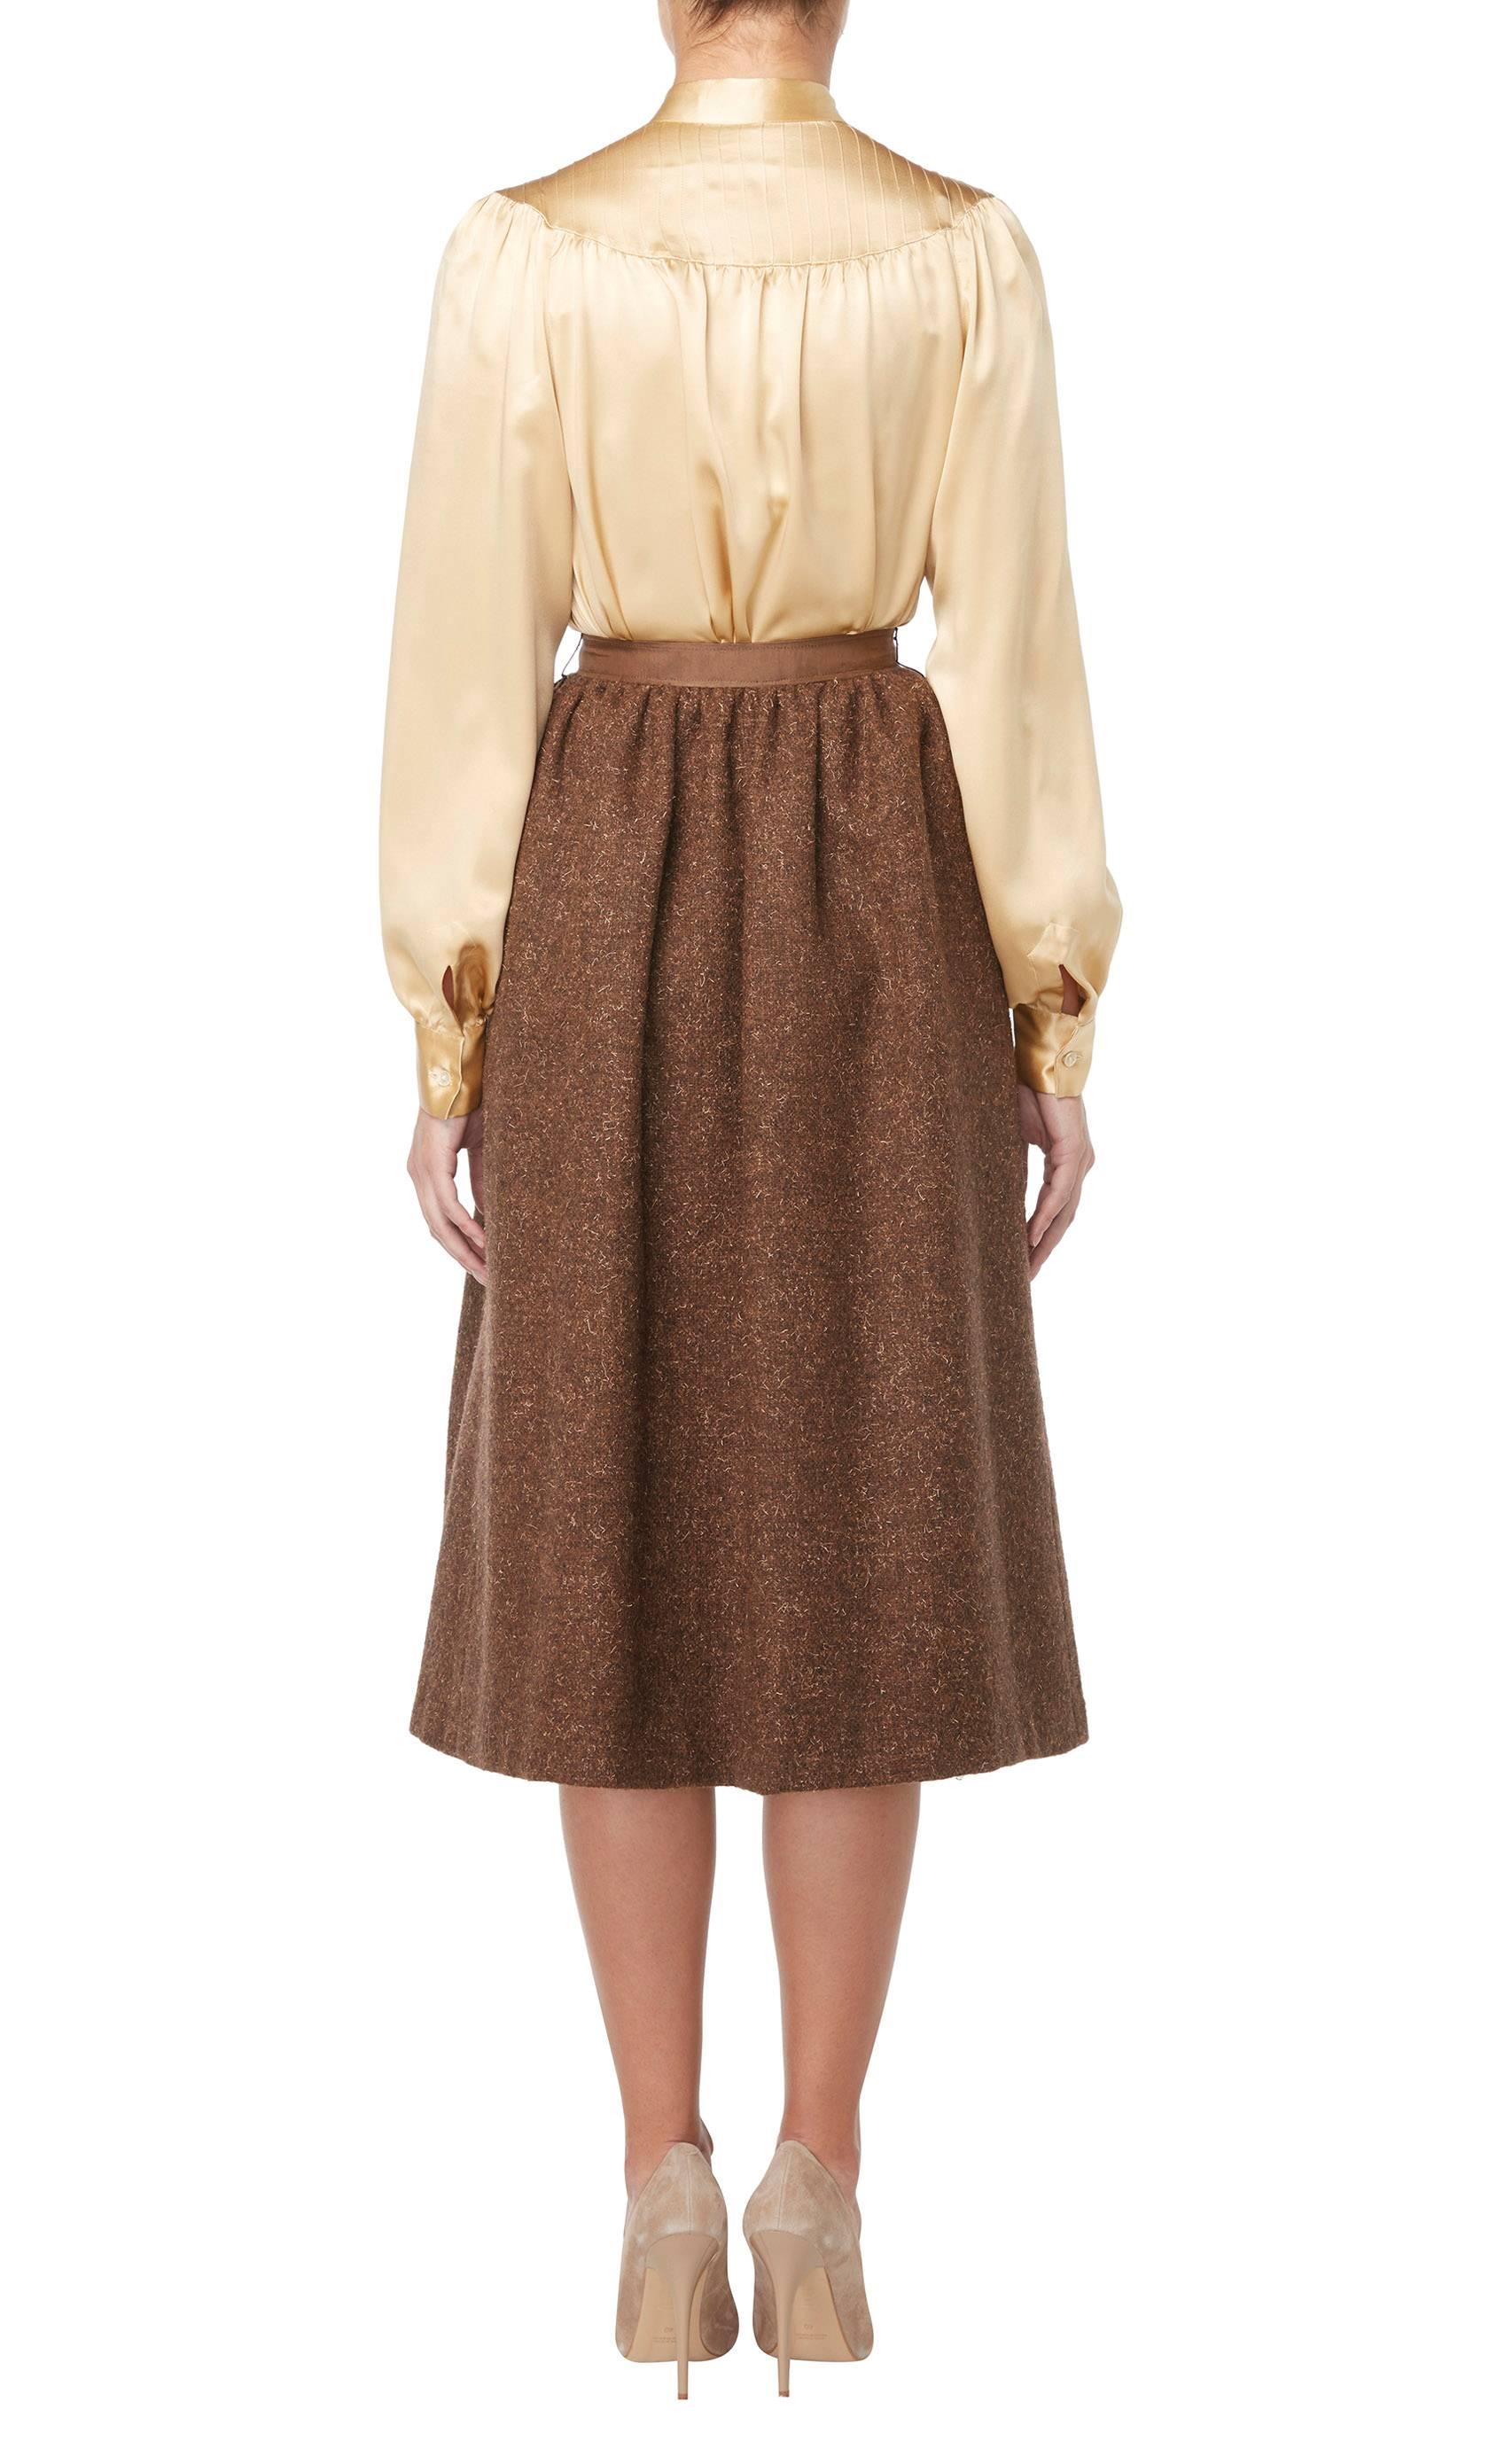 Brown Guy Laroche haute couture brown skirt suit, circa 1957 For Sale